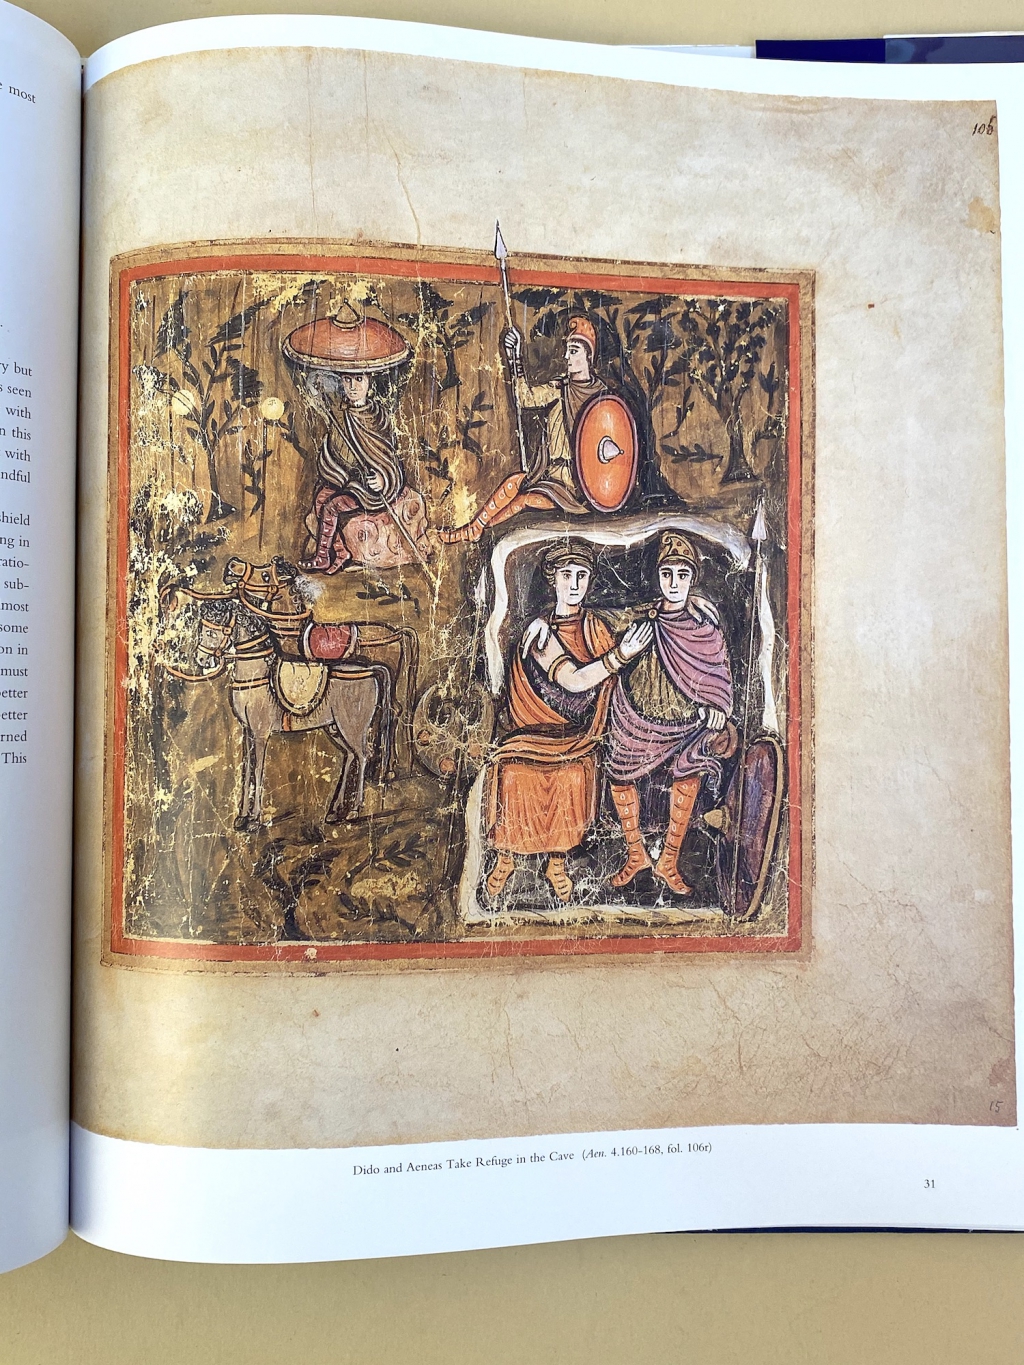 Dido and Aeneas take refuge in a cave. Reproduced from Wright, The Roman Vergil (2001).